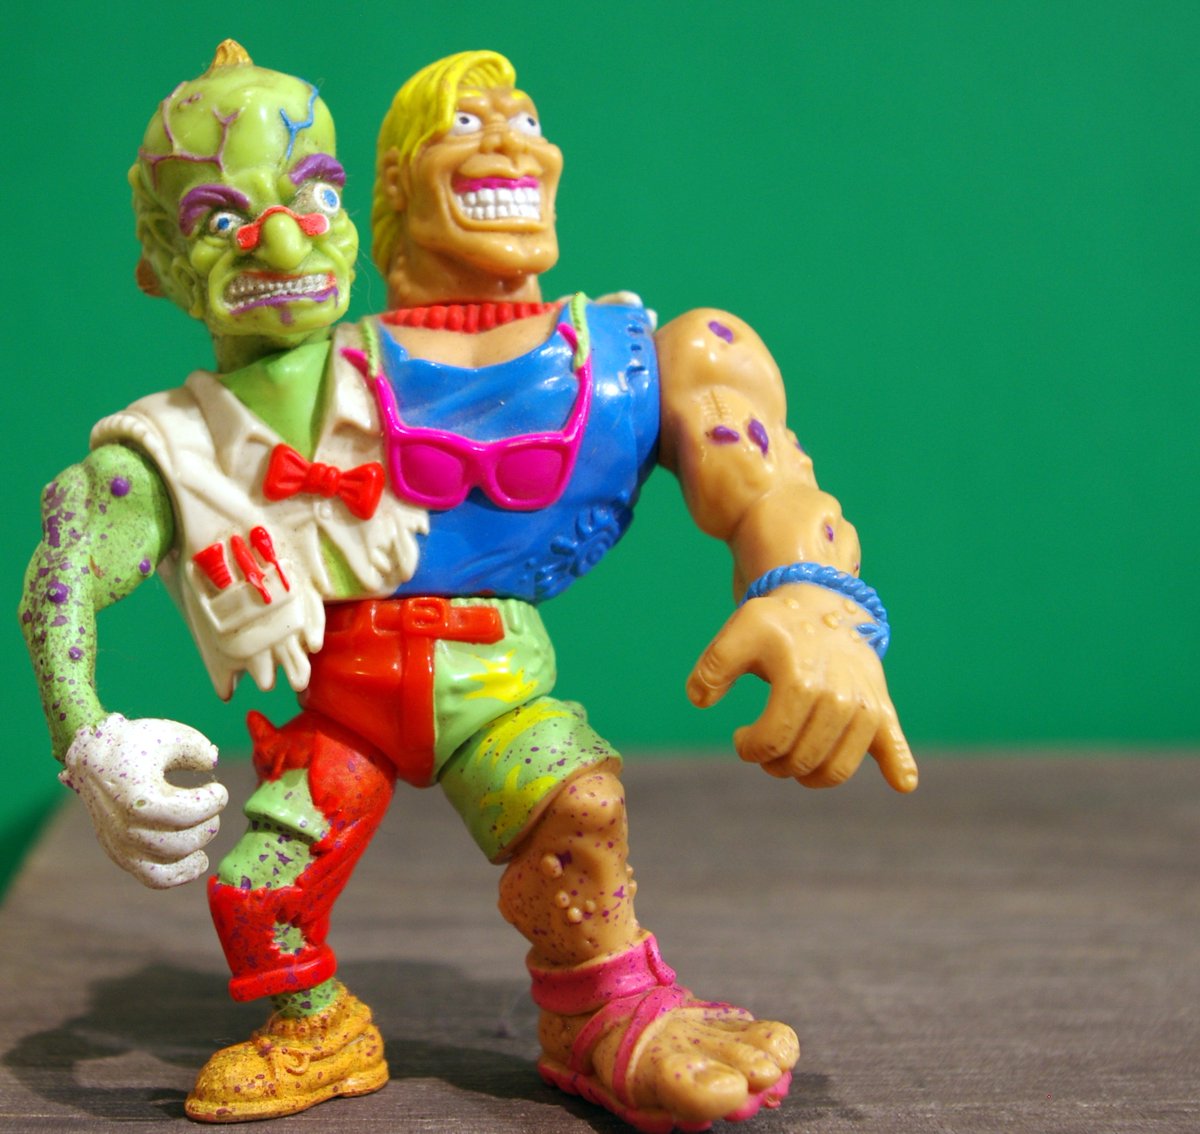 Attack of early millenial cartoons! Real Ghostbusters, Crash Dummies, and The Toxic Crusaders. I'll talk about the toxic crusaders for a bit, they're ridiculous. Have you seen The Toxic Avenger? It's a  #Troma film, hard R, lots of gore and nudity. In 1990 it became a cartoon.